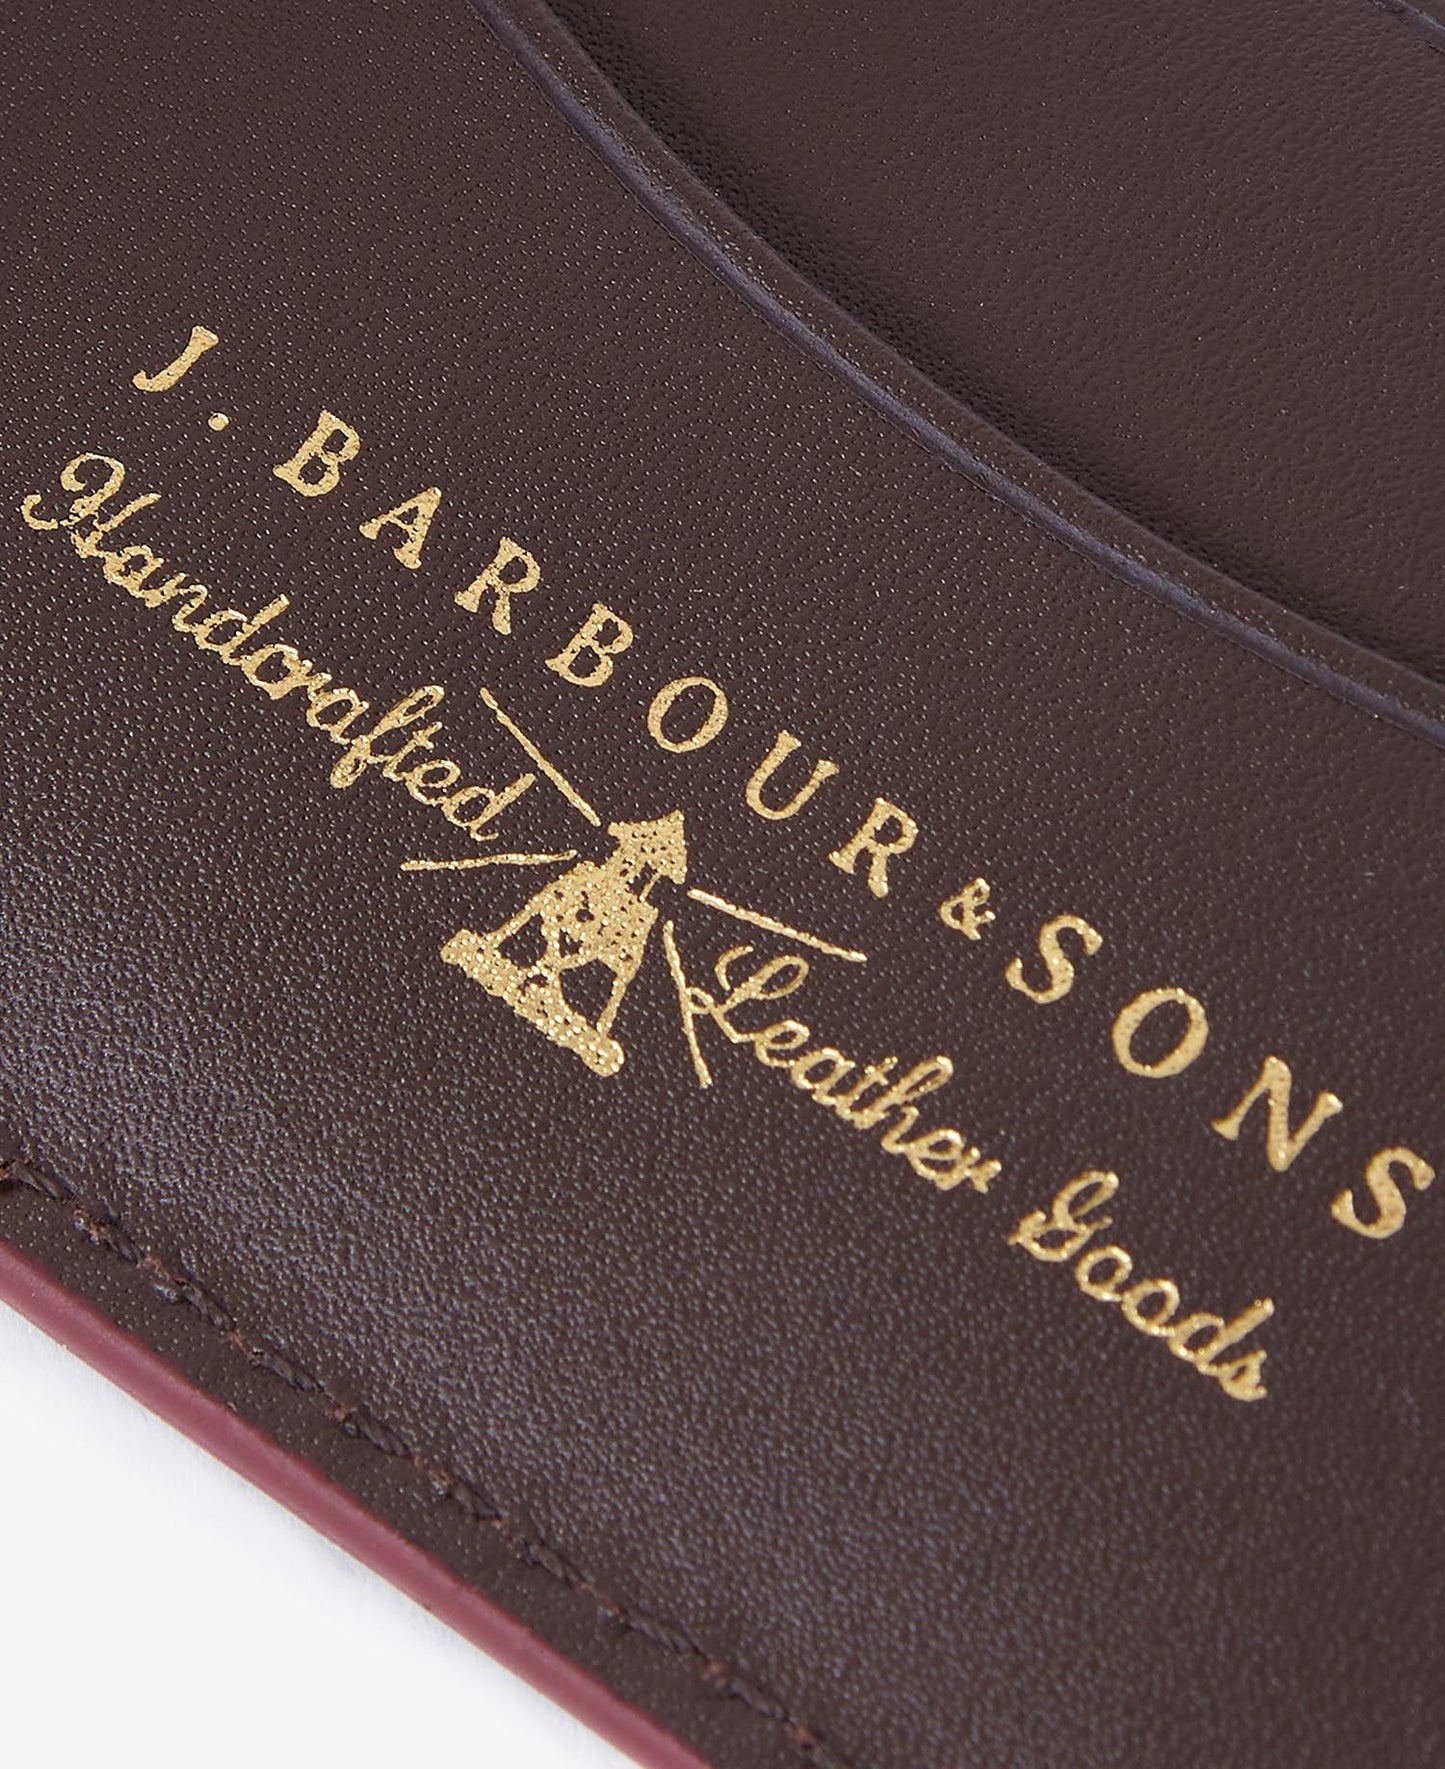 Barbour Leather Billfold